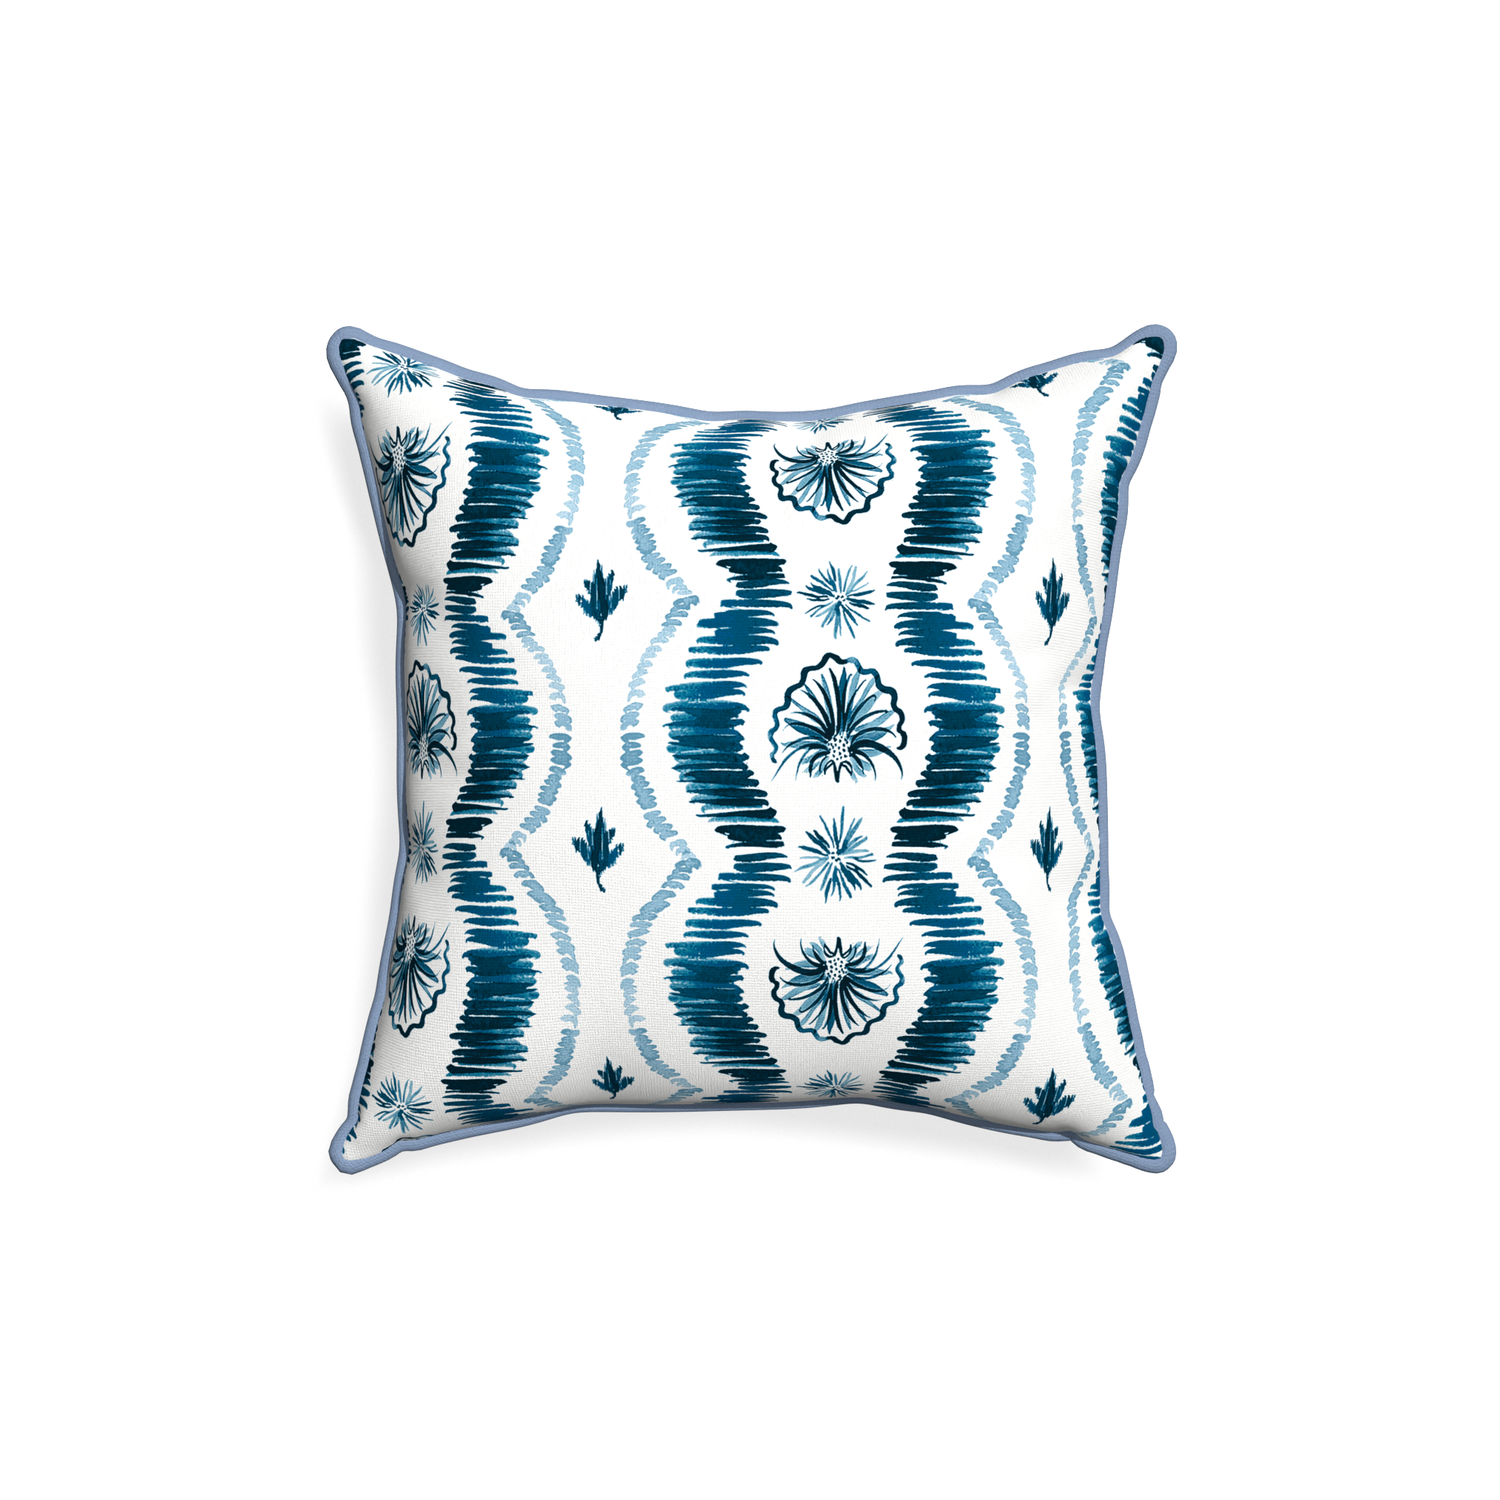 18-square alice custom blue ikatpillow with sky piping on white background